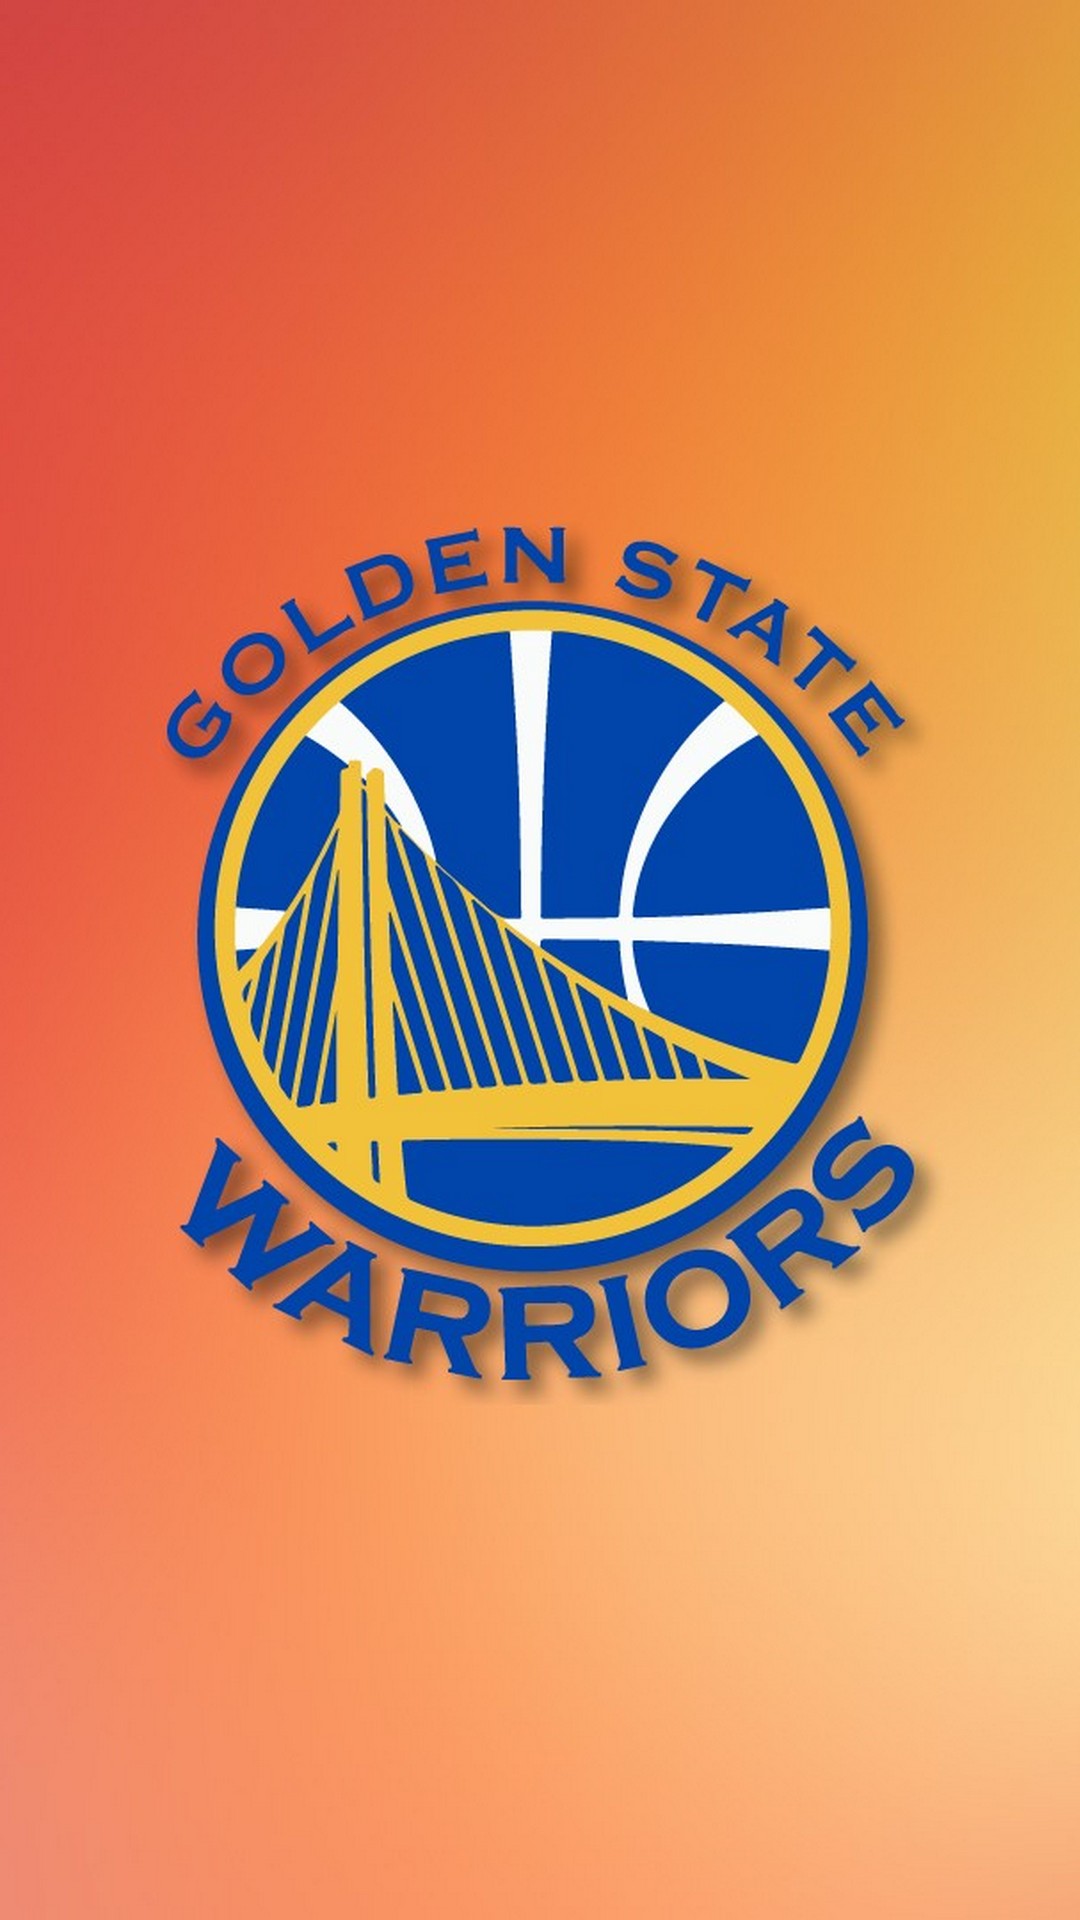 Golden State Warriors Mobile Wallpaper HD with image resolution 1080x1920 pixel. You can make this wallpaper for your Desktop Computer Backgrounds, Mac Wallpapers, Android Lock screen or iPhone Screensavers